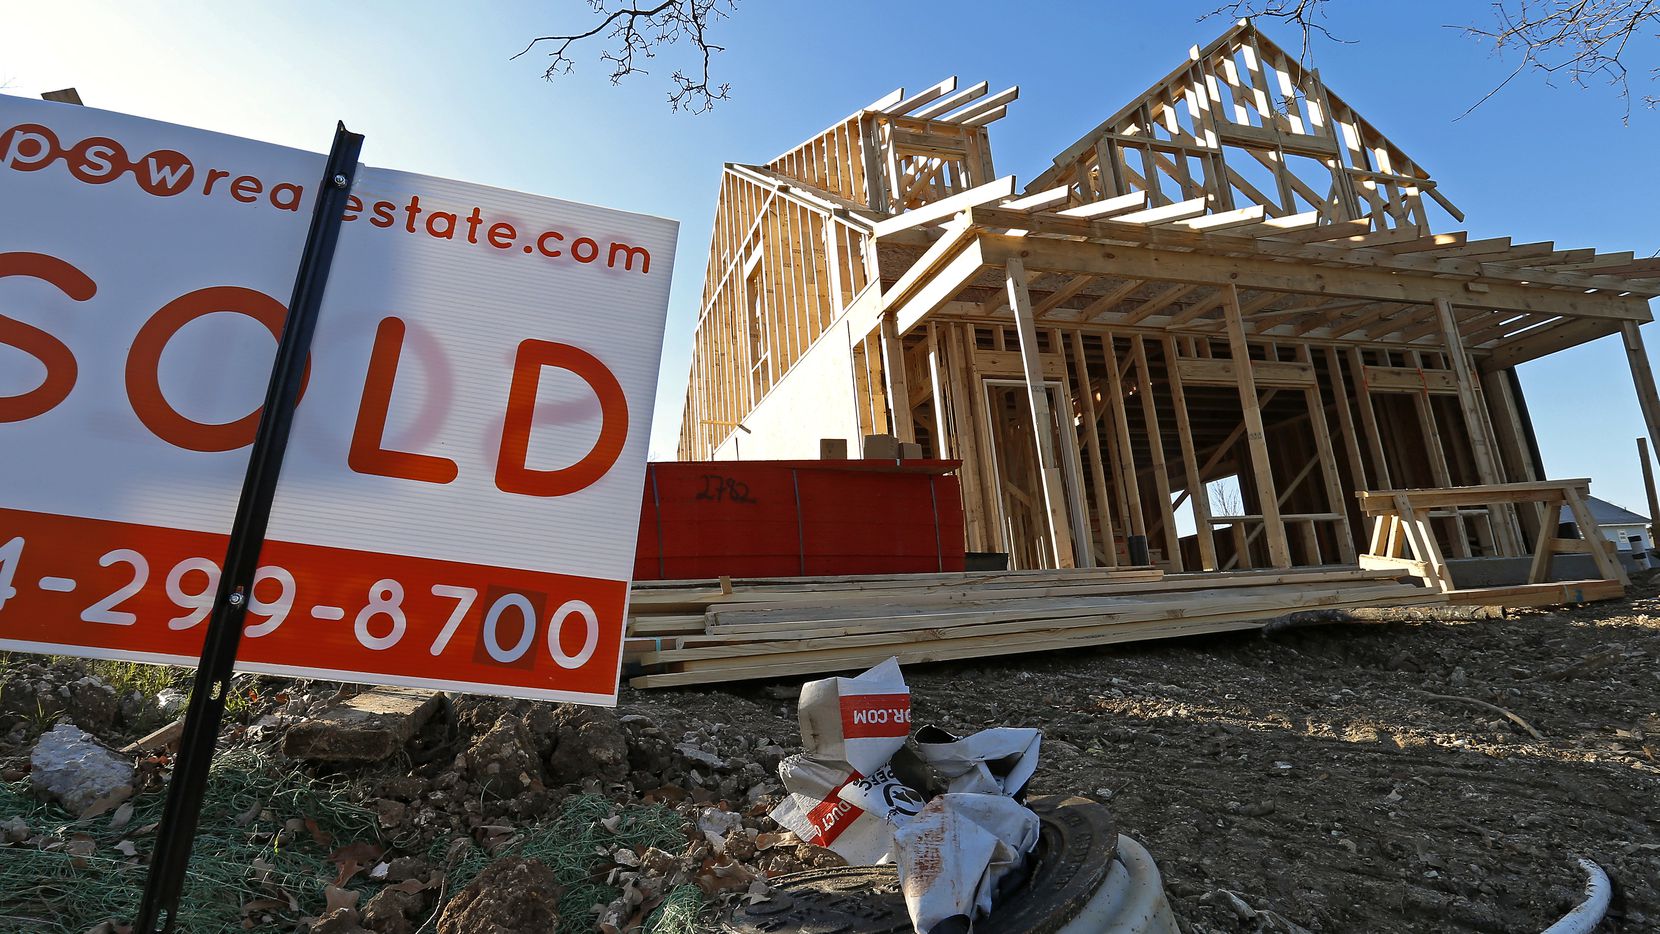 New home prices are rising thanks to increased demand and higher construction costs.